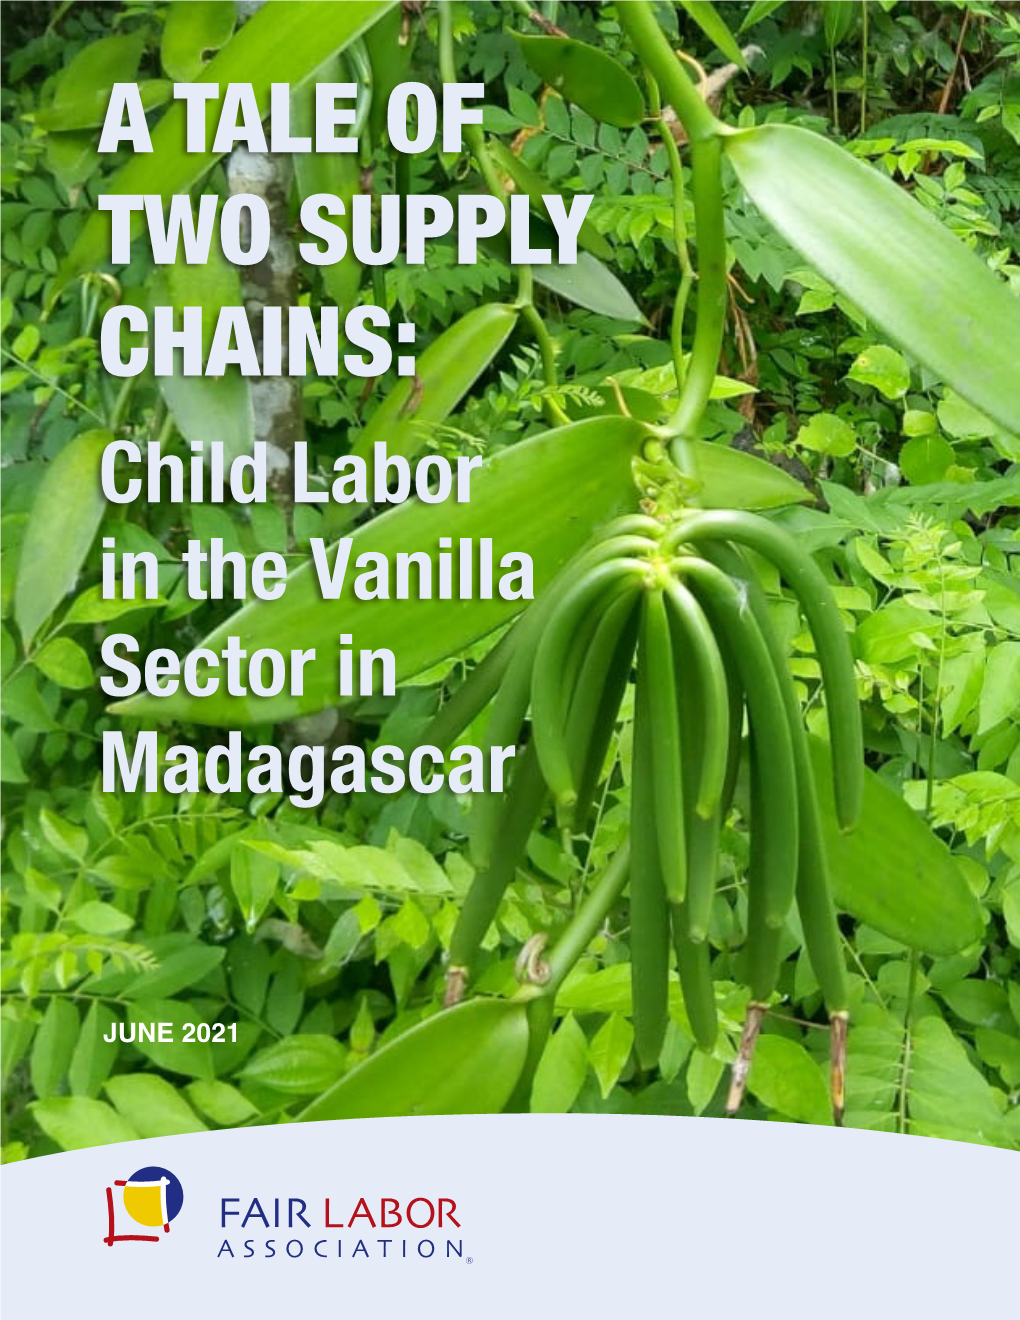 A Tale of Two Supply Chains: Child Labor in the Vanilla Sector in Madagascar